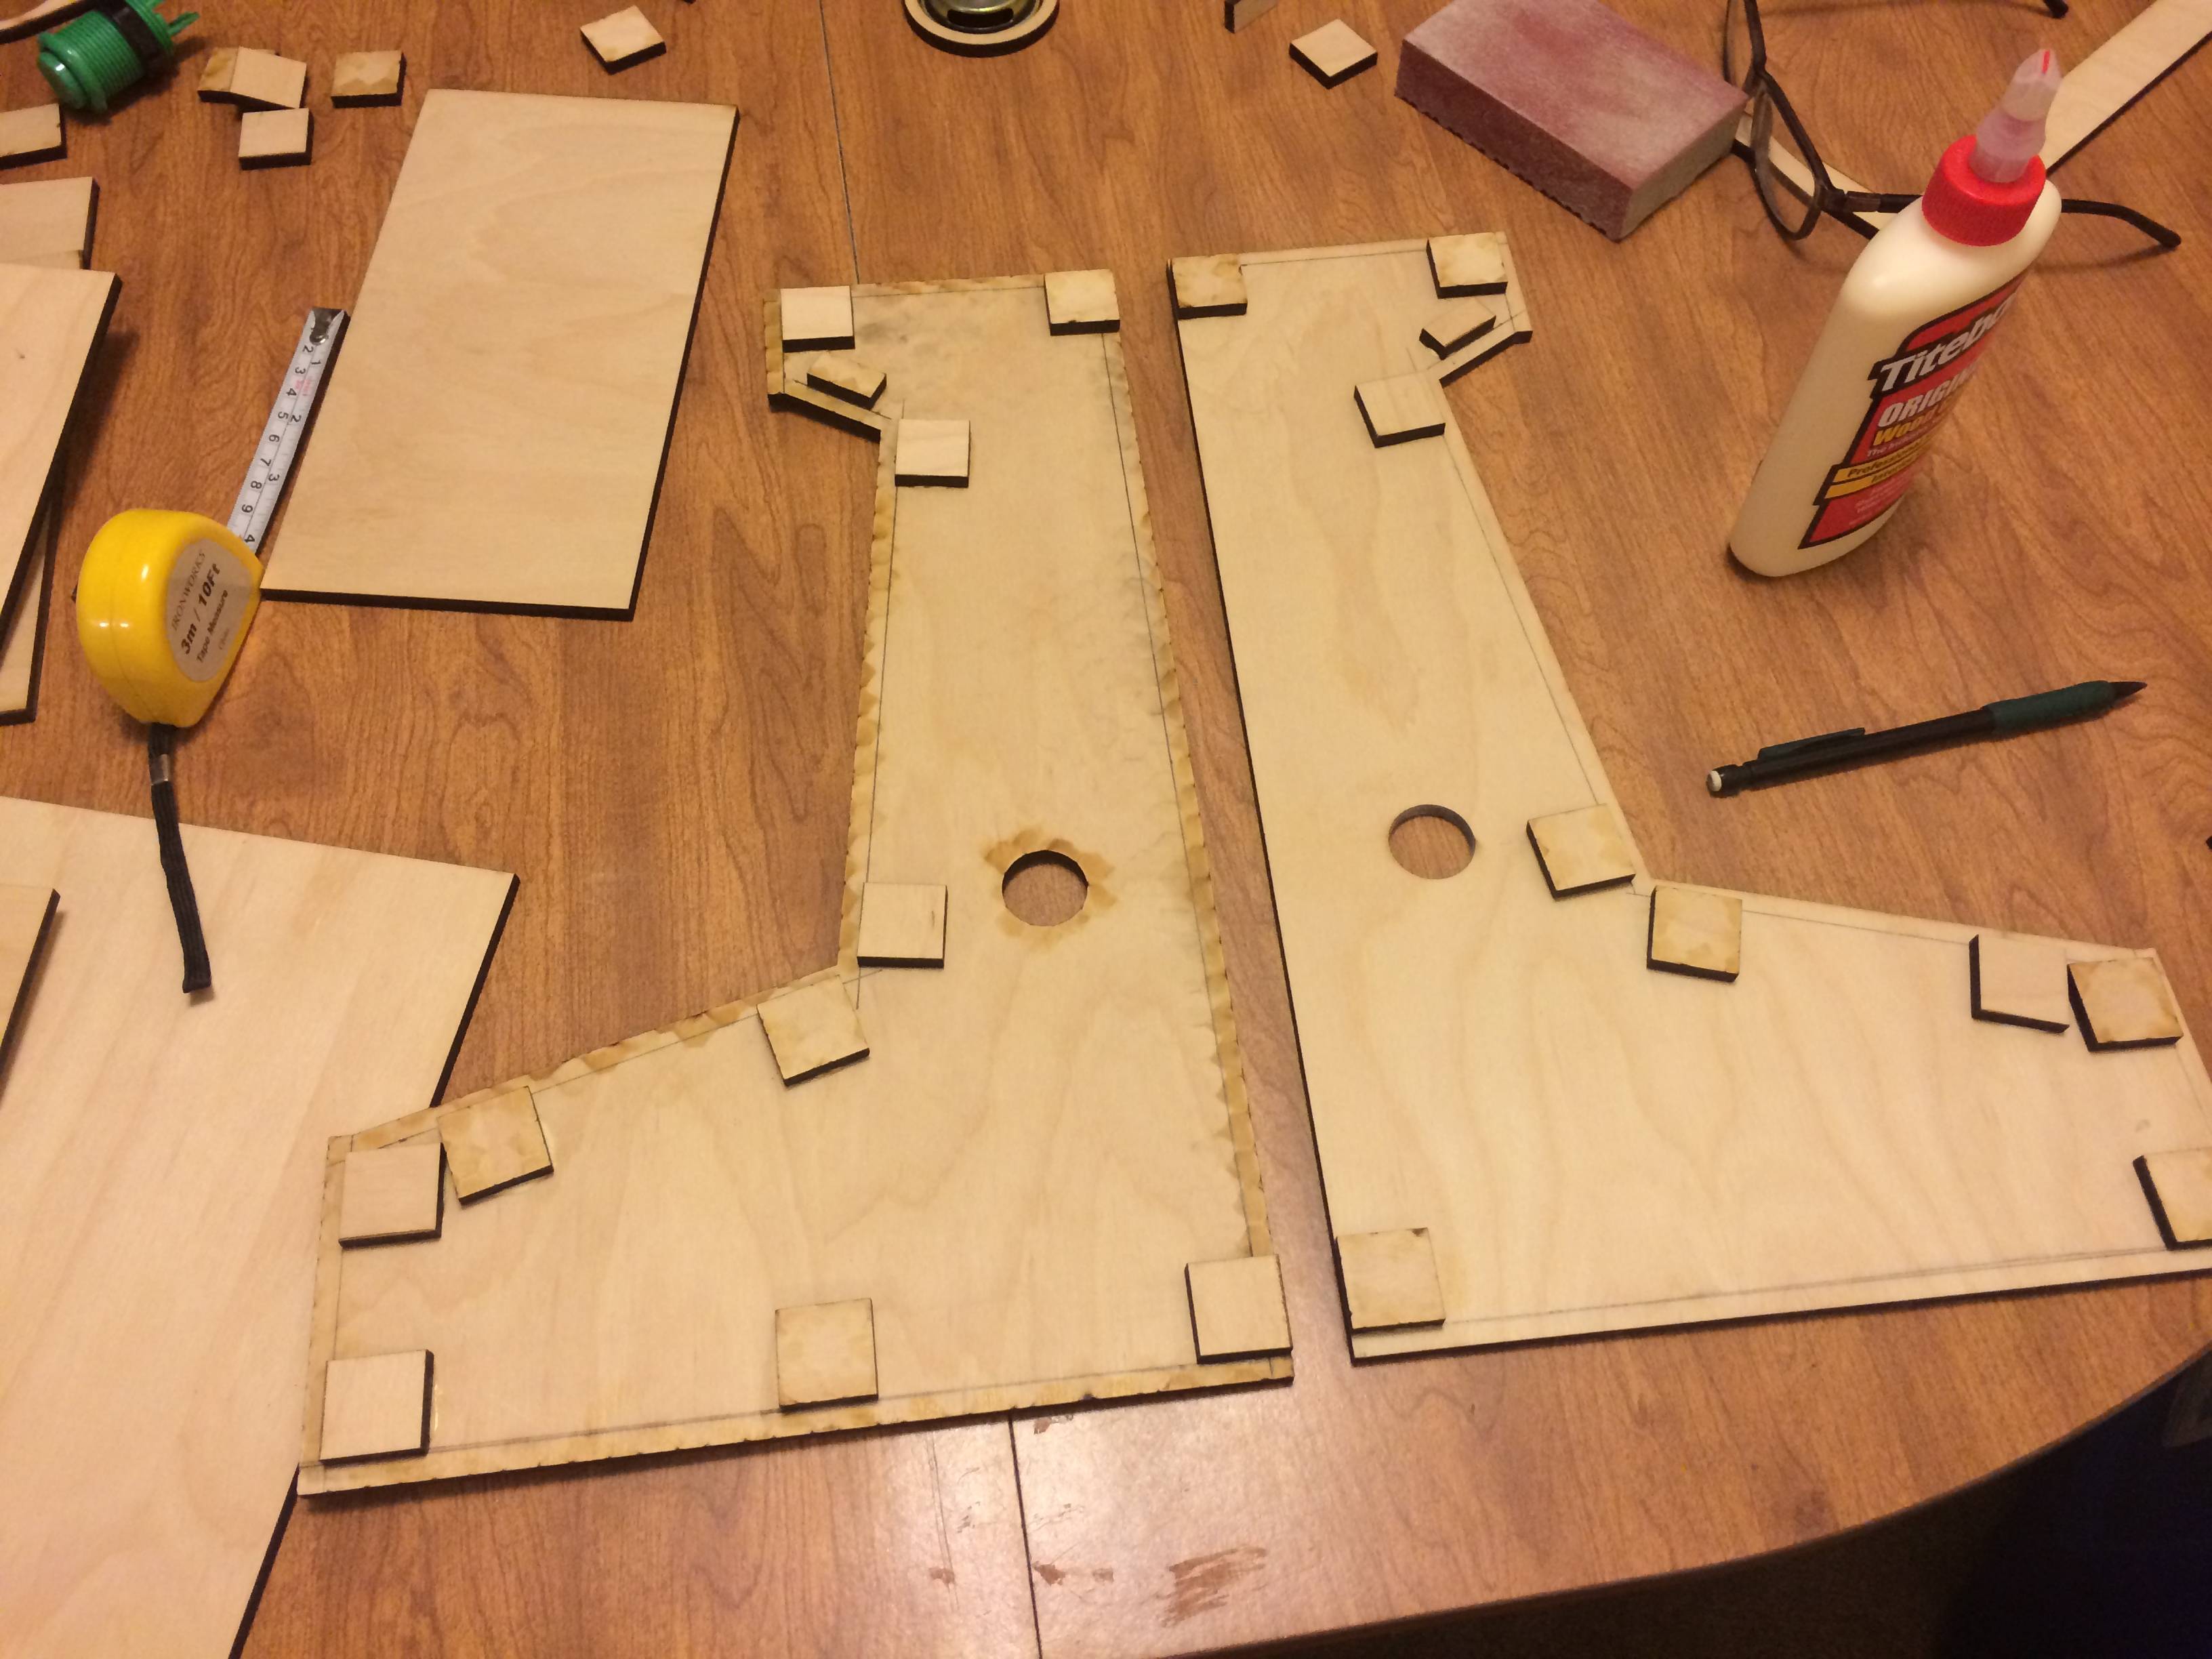 Here is how I made sure all the panels would sit flush. I had a bunch of 1X1 squares cut and used them as supports. When placing them down I had another piece of wood so that they would be exactly ¼ inch away from the edge. Ended up working perfect as all my joints are freaking sweeeet.